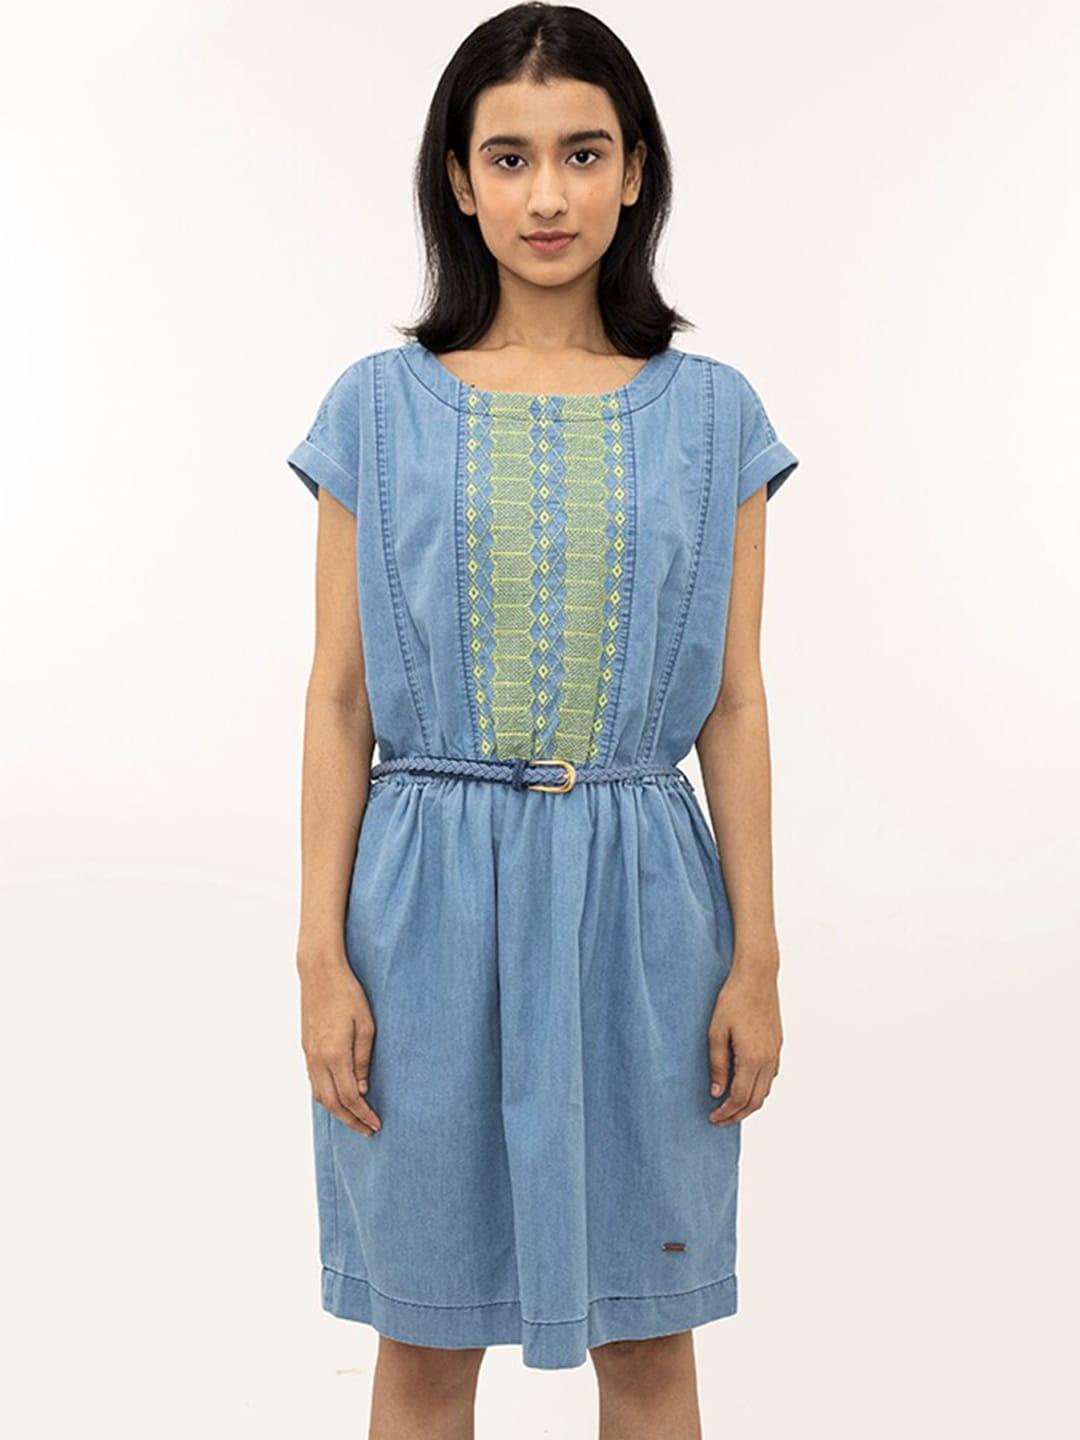 harbour 9 cap sleeves embroidered detail a-line dress